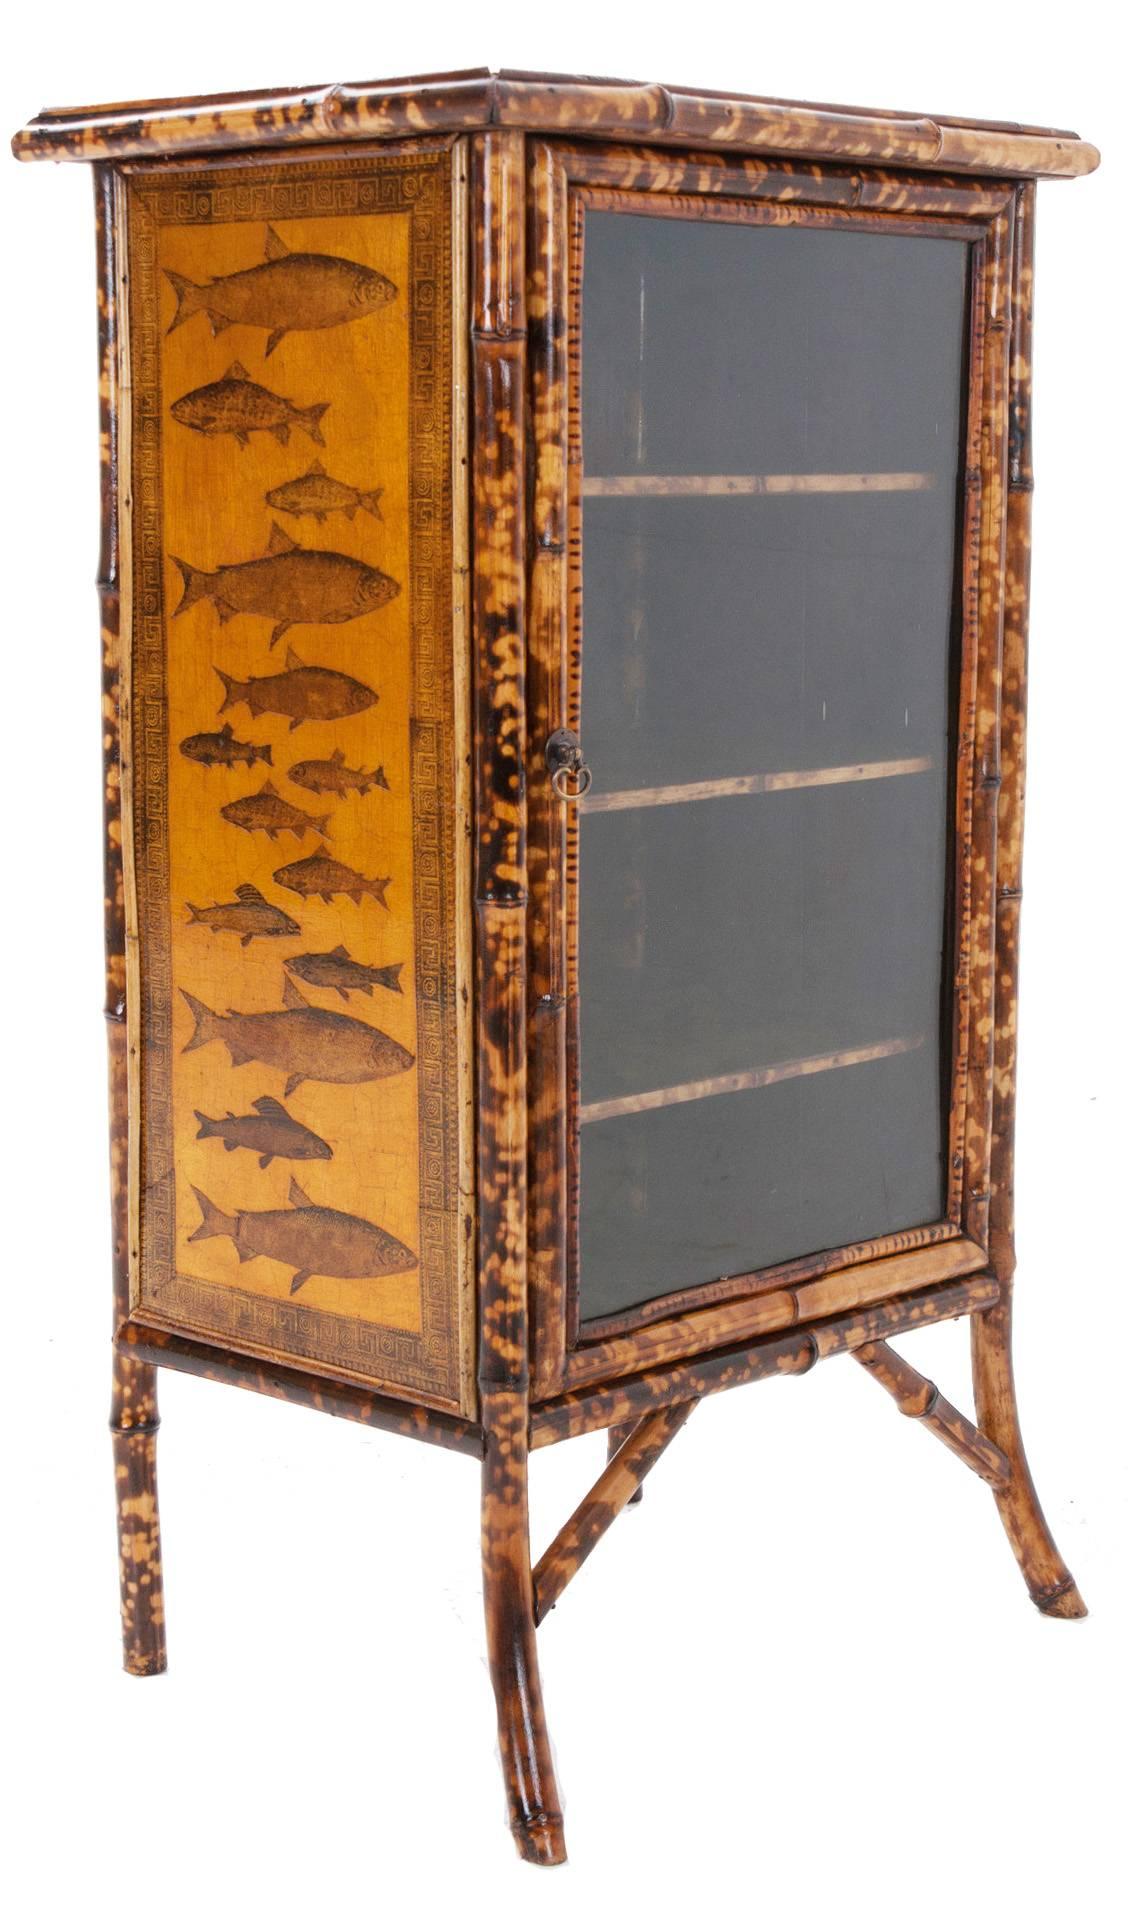 English, 1890s bamboo cabinet is sturdy and re-finished with black and metallic yellow paint overlaid with decoupage of fish and an interesting boarder, one framed glass door with three original twail shelves.